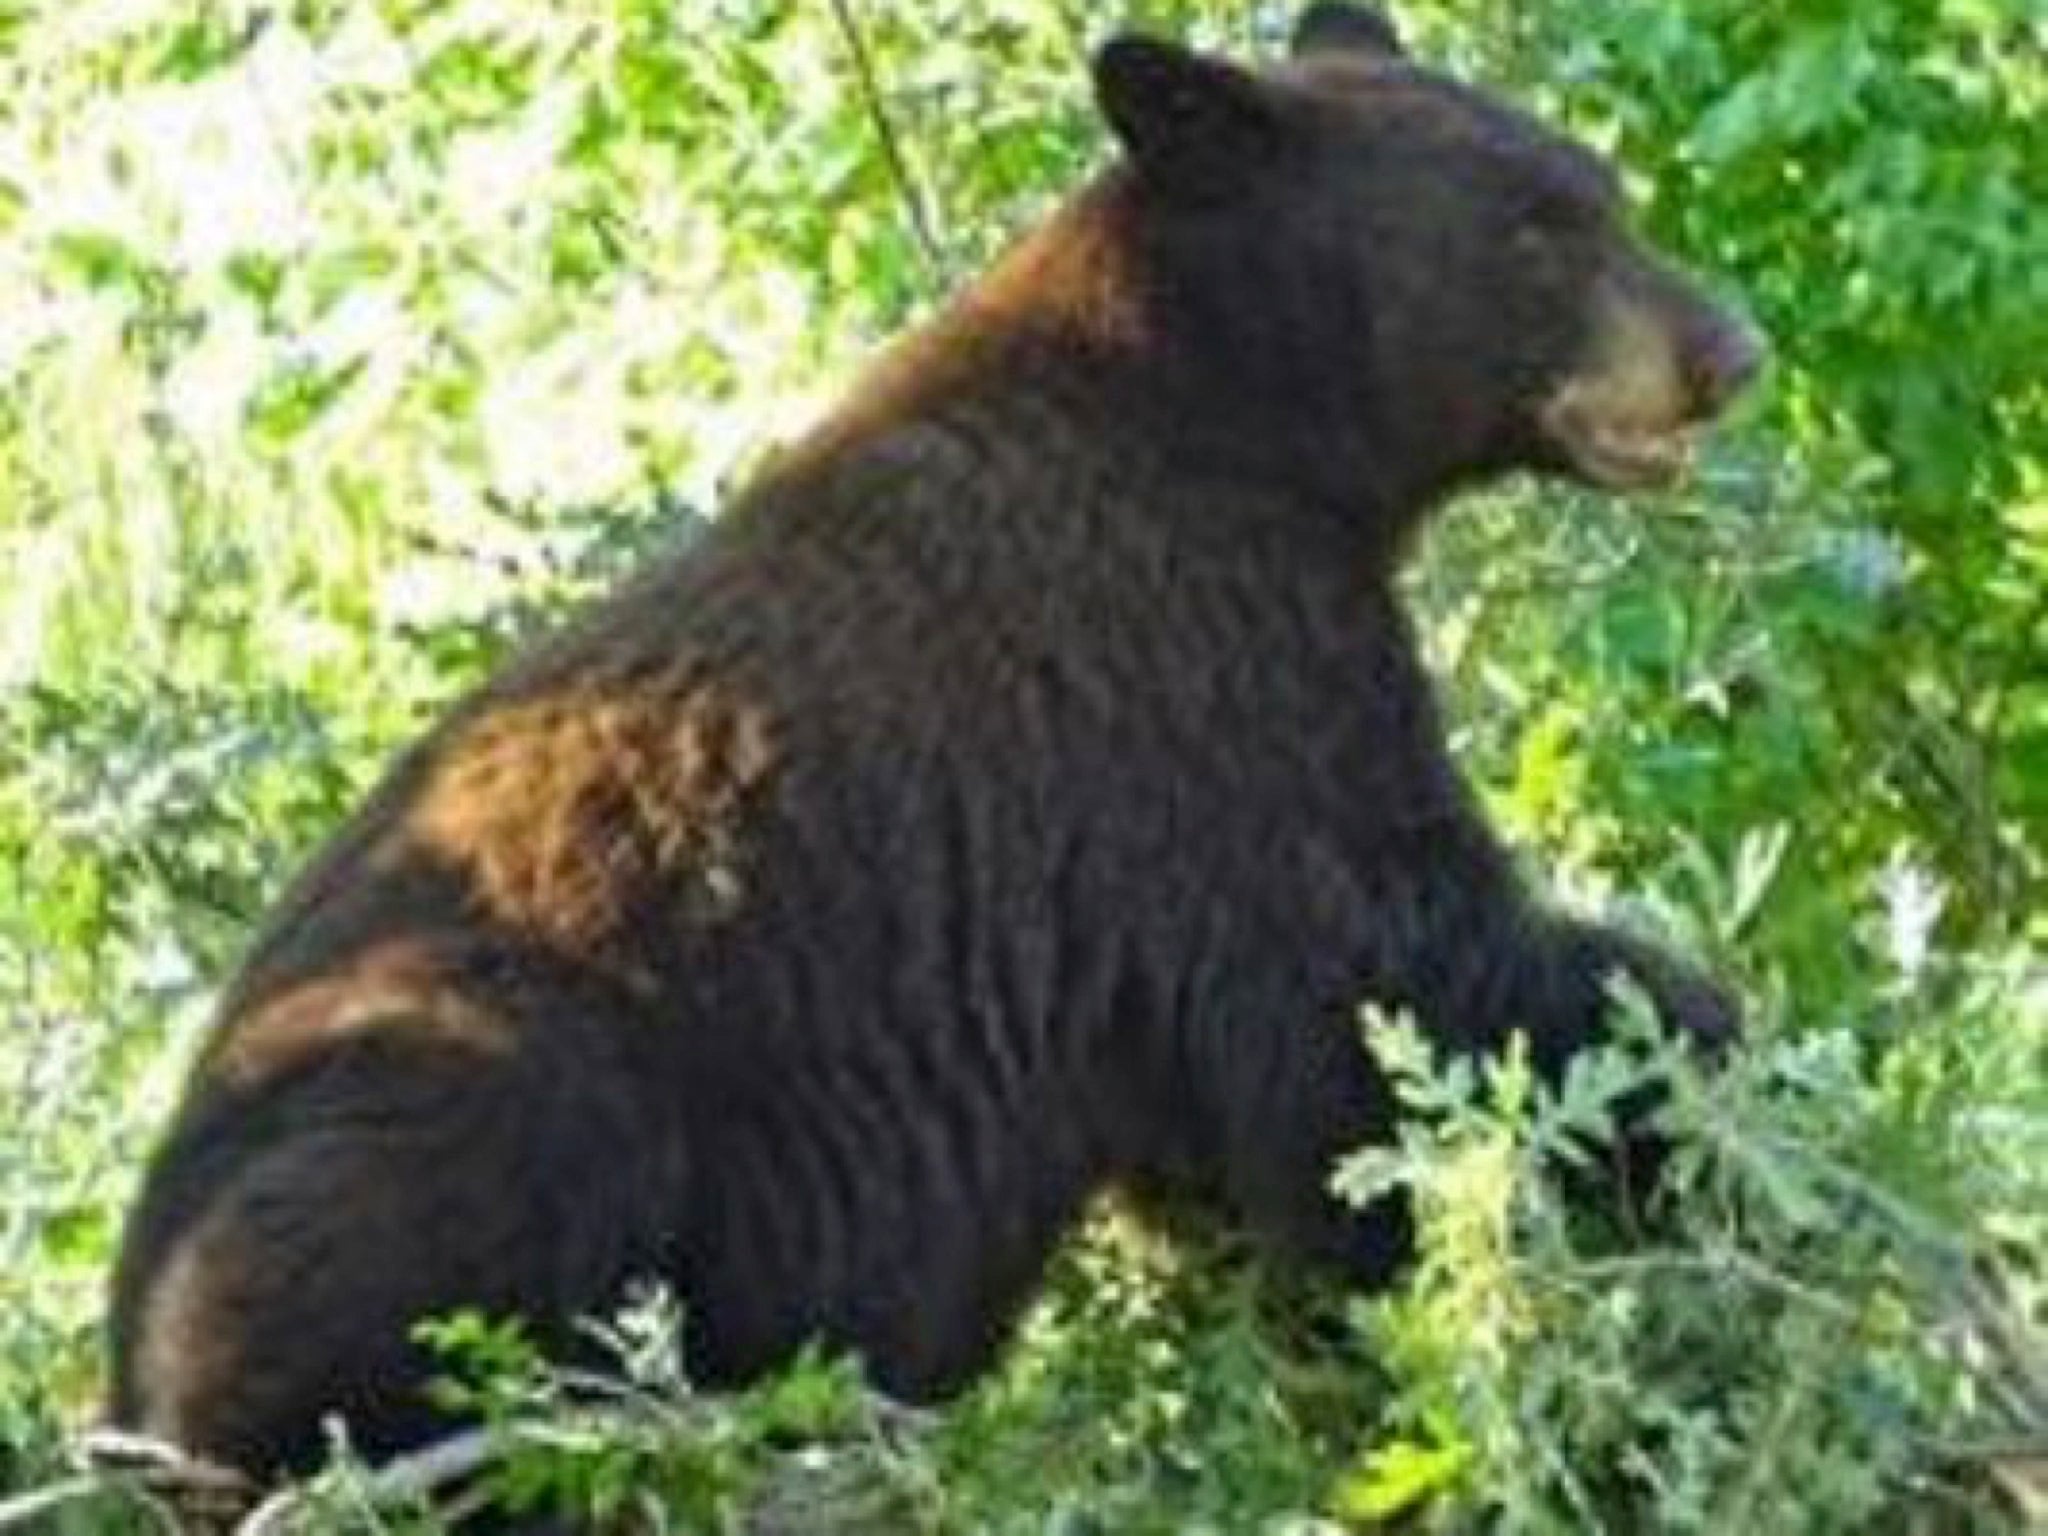 There are large numbers of bears and other wildlife in Waterton Canyon